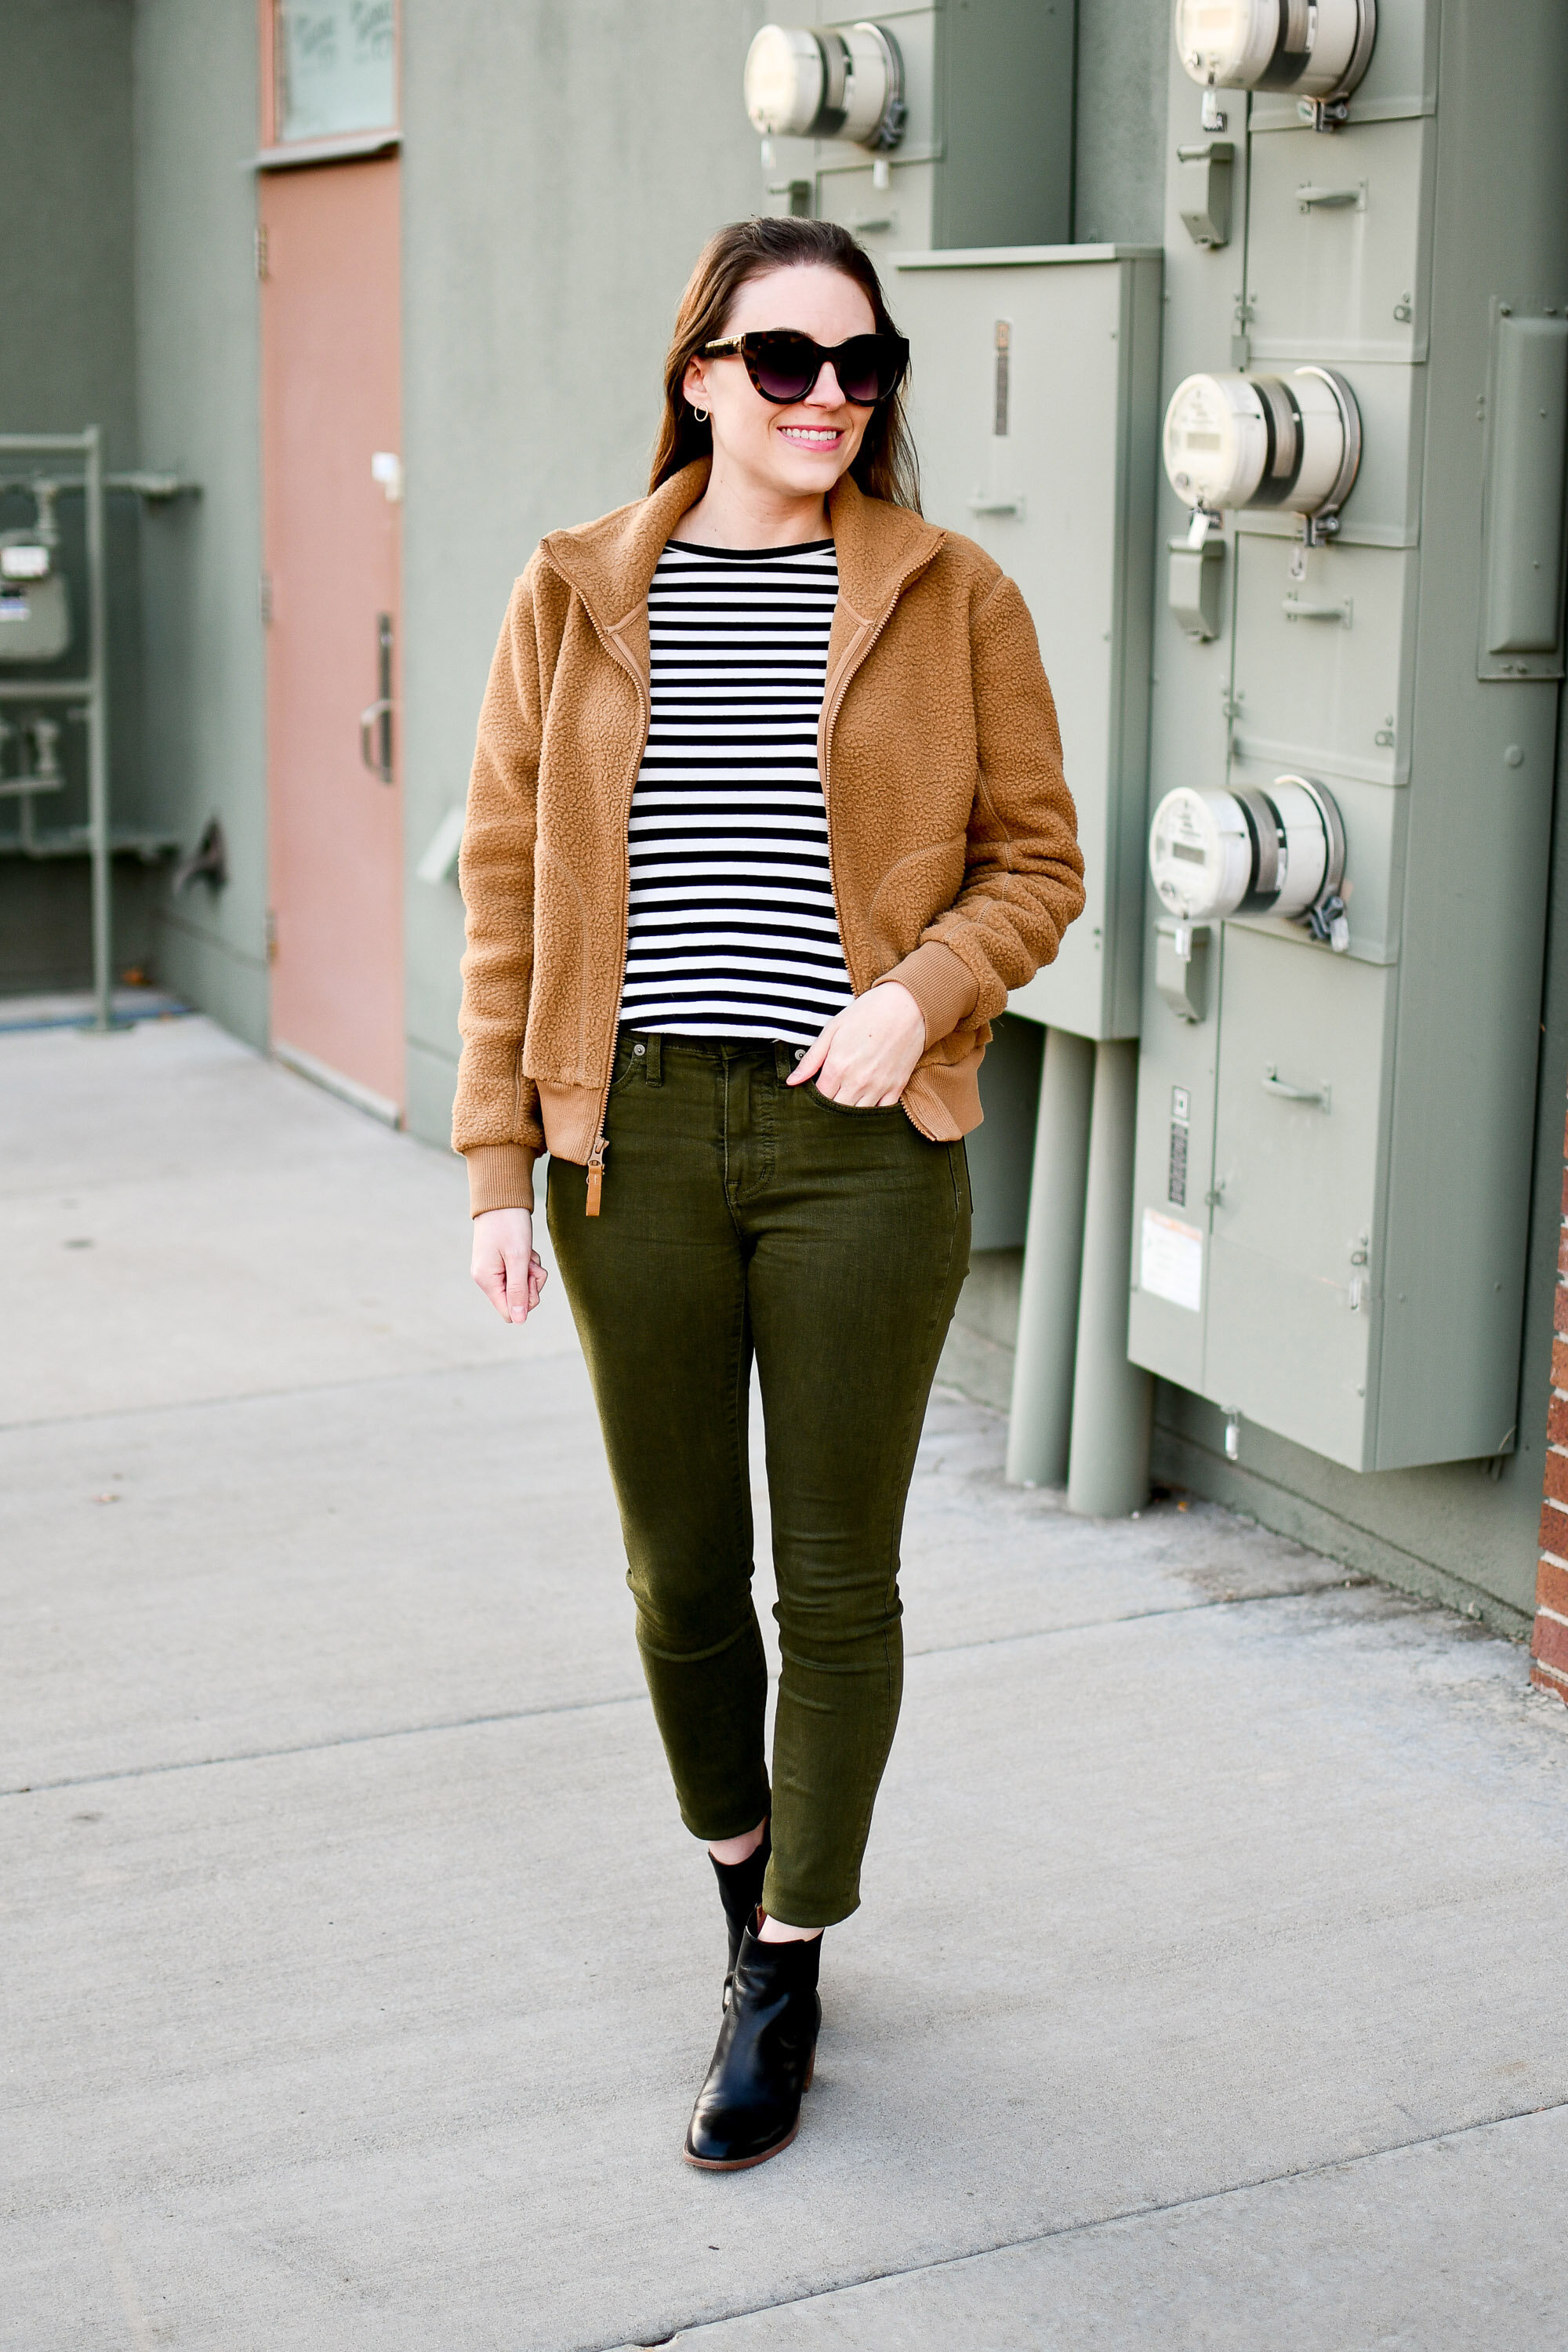 Favorite outfit: ReNewing old favorites — Cotton Cashmere Cat Hair